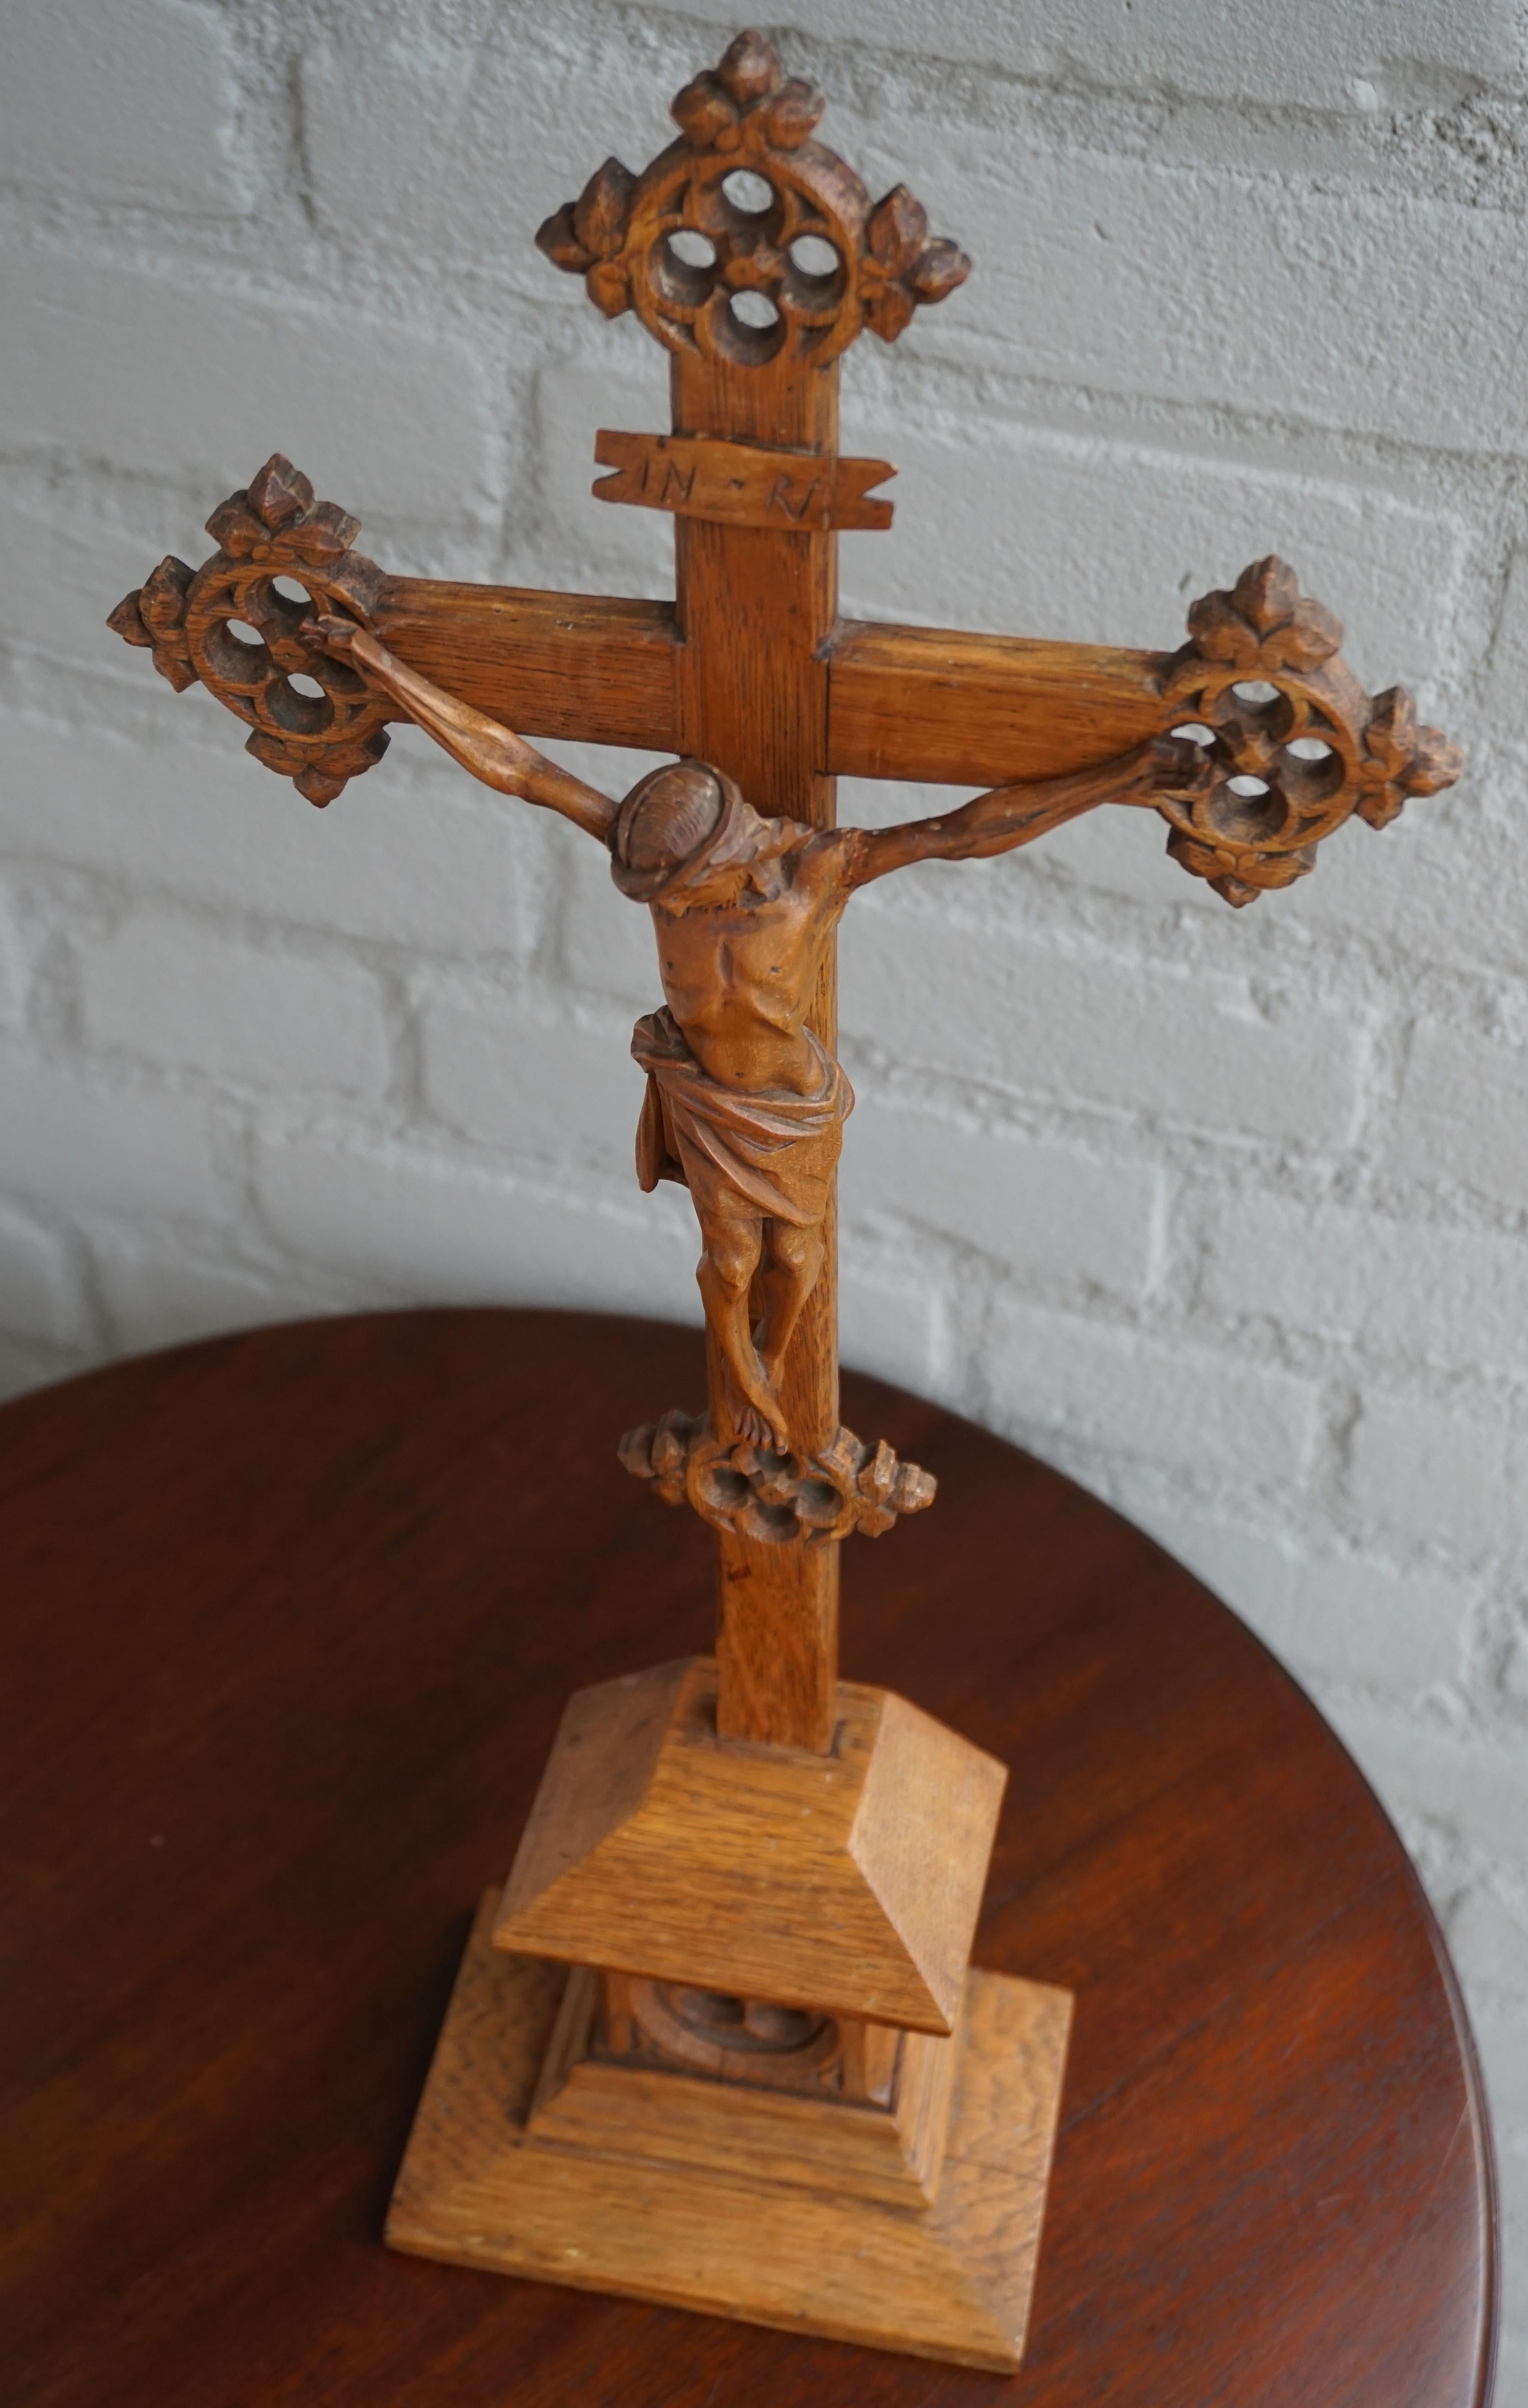 Dutch Early 1900s Hand Carved Gothic Revival Table Crucifix with Corpus of Christ 1910